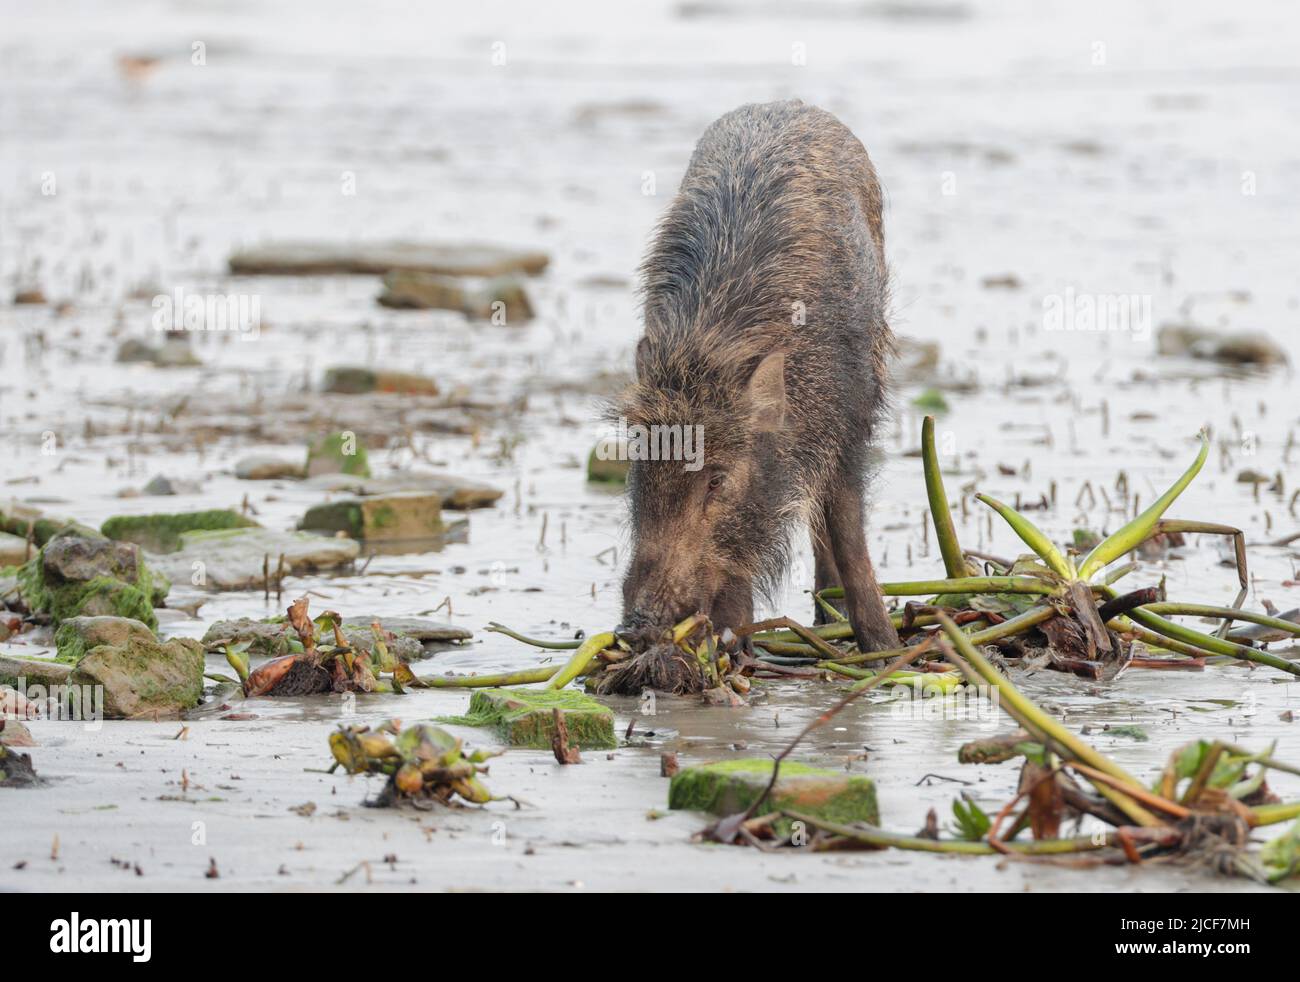 wild boar, also known as the wild swine, common wild pig or simply wild pig. Stock Photo